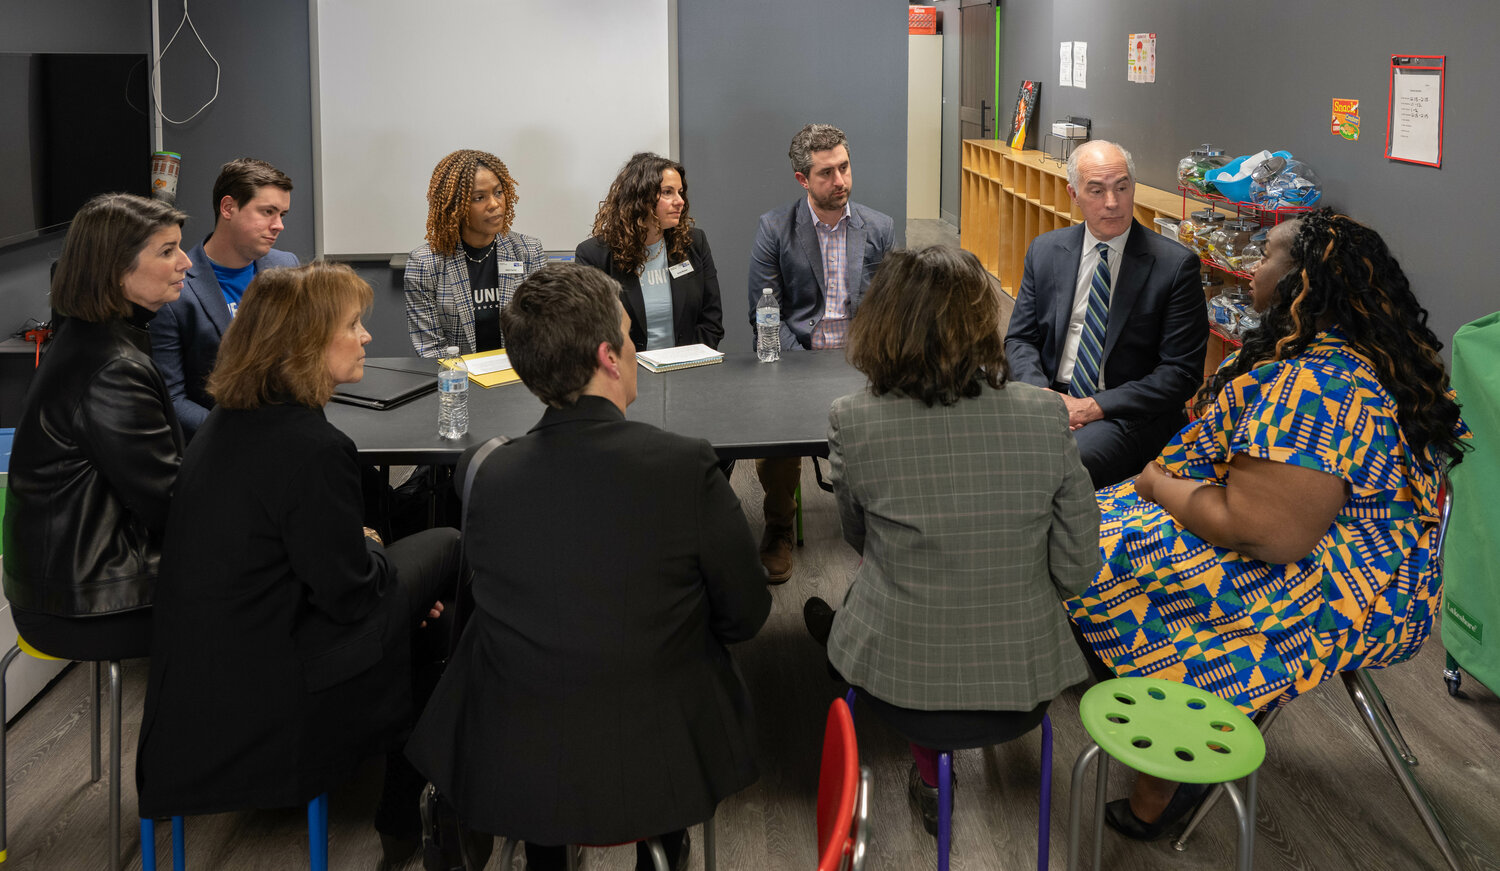 Senator Bob Casey participates in a roundtable discussion with representatives of Children First, United Way, Bucks County Community College and Children of God Early Learning Center during a Feb. 16 visit.